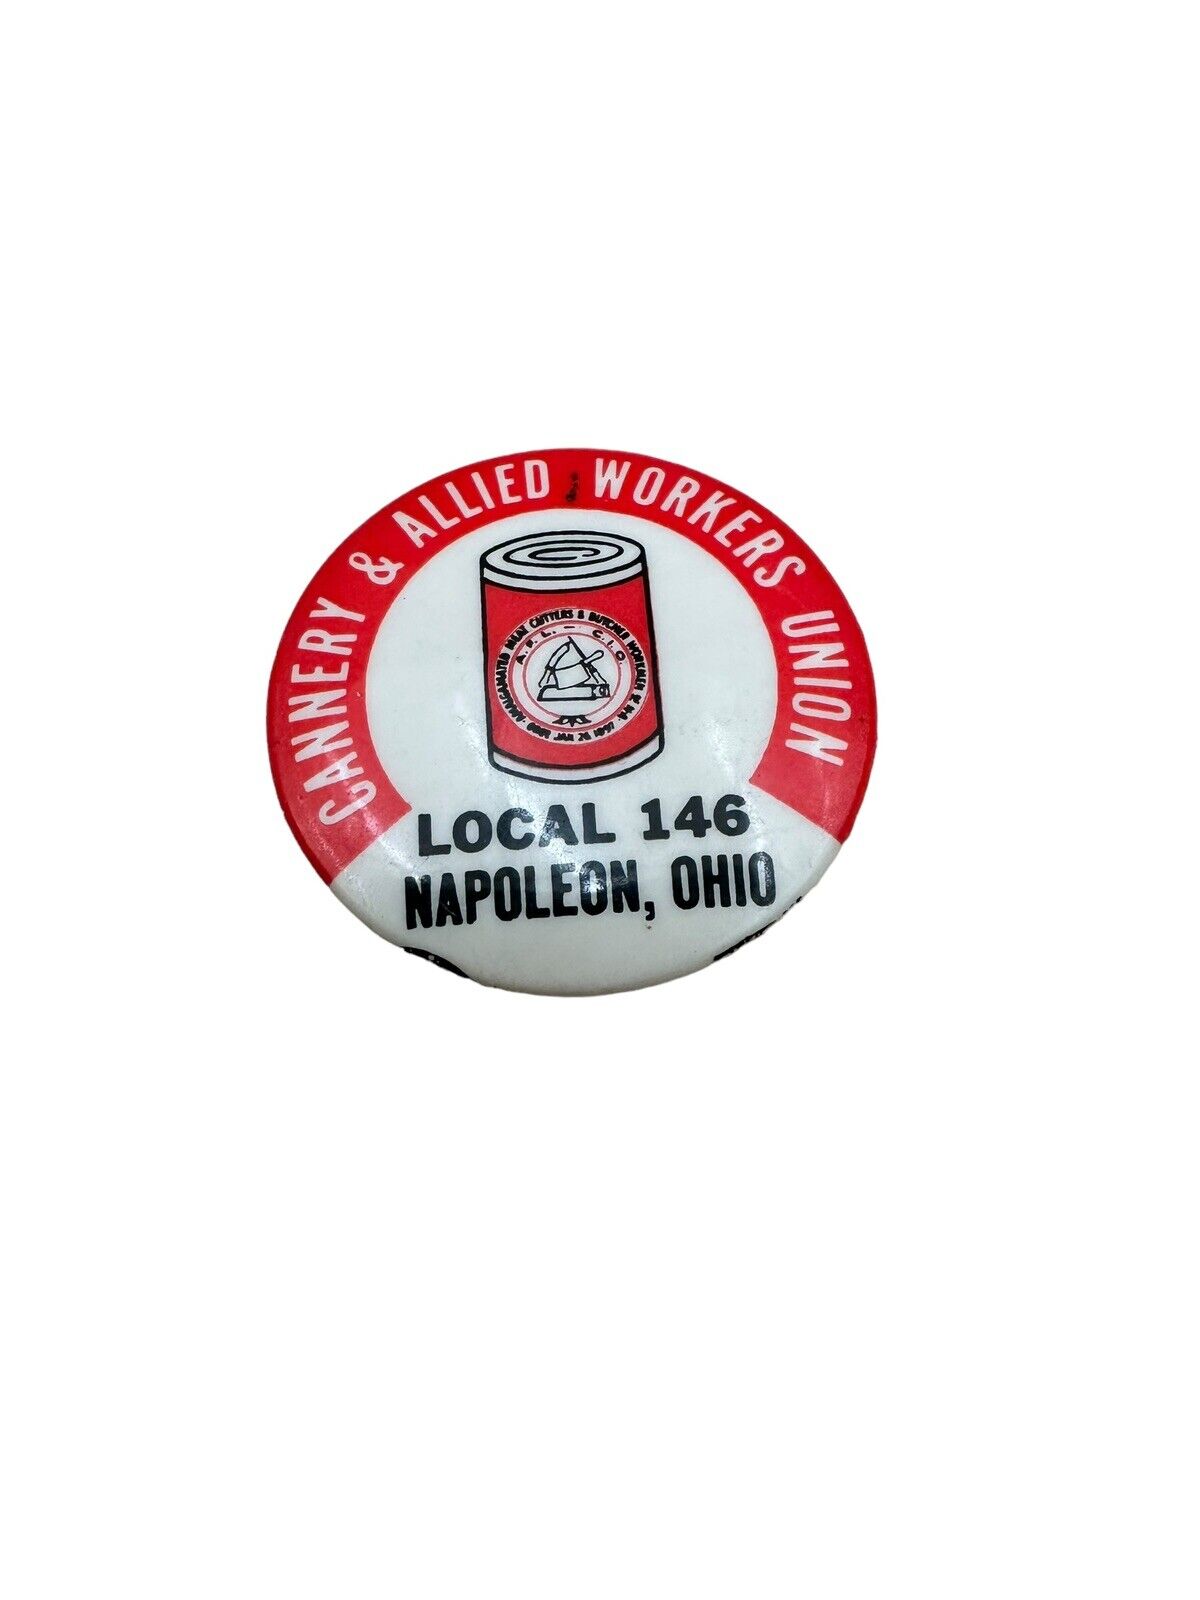 VINTAGE & ORIGINAL EMPLOYEE Union PIN FROM CAMPBELL SOUP CO. Napoleon Ohio